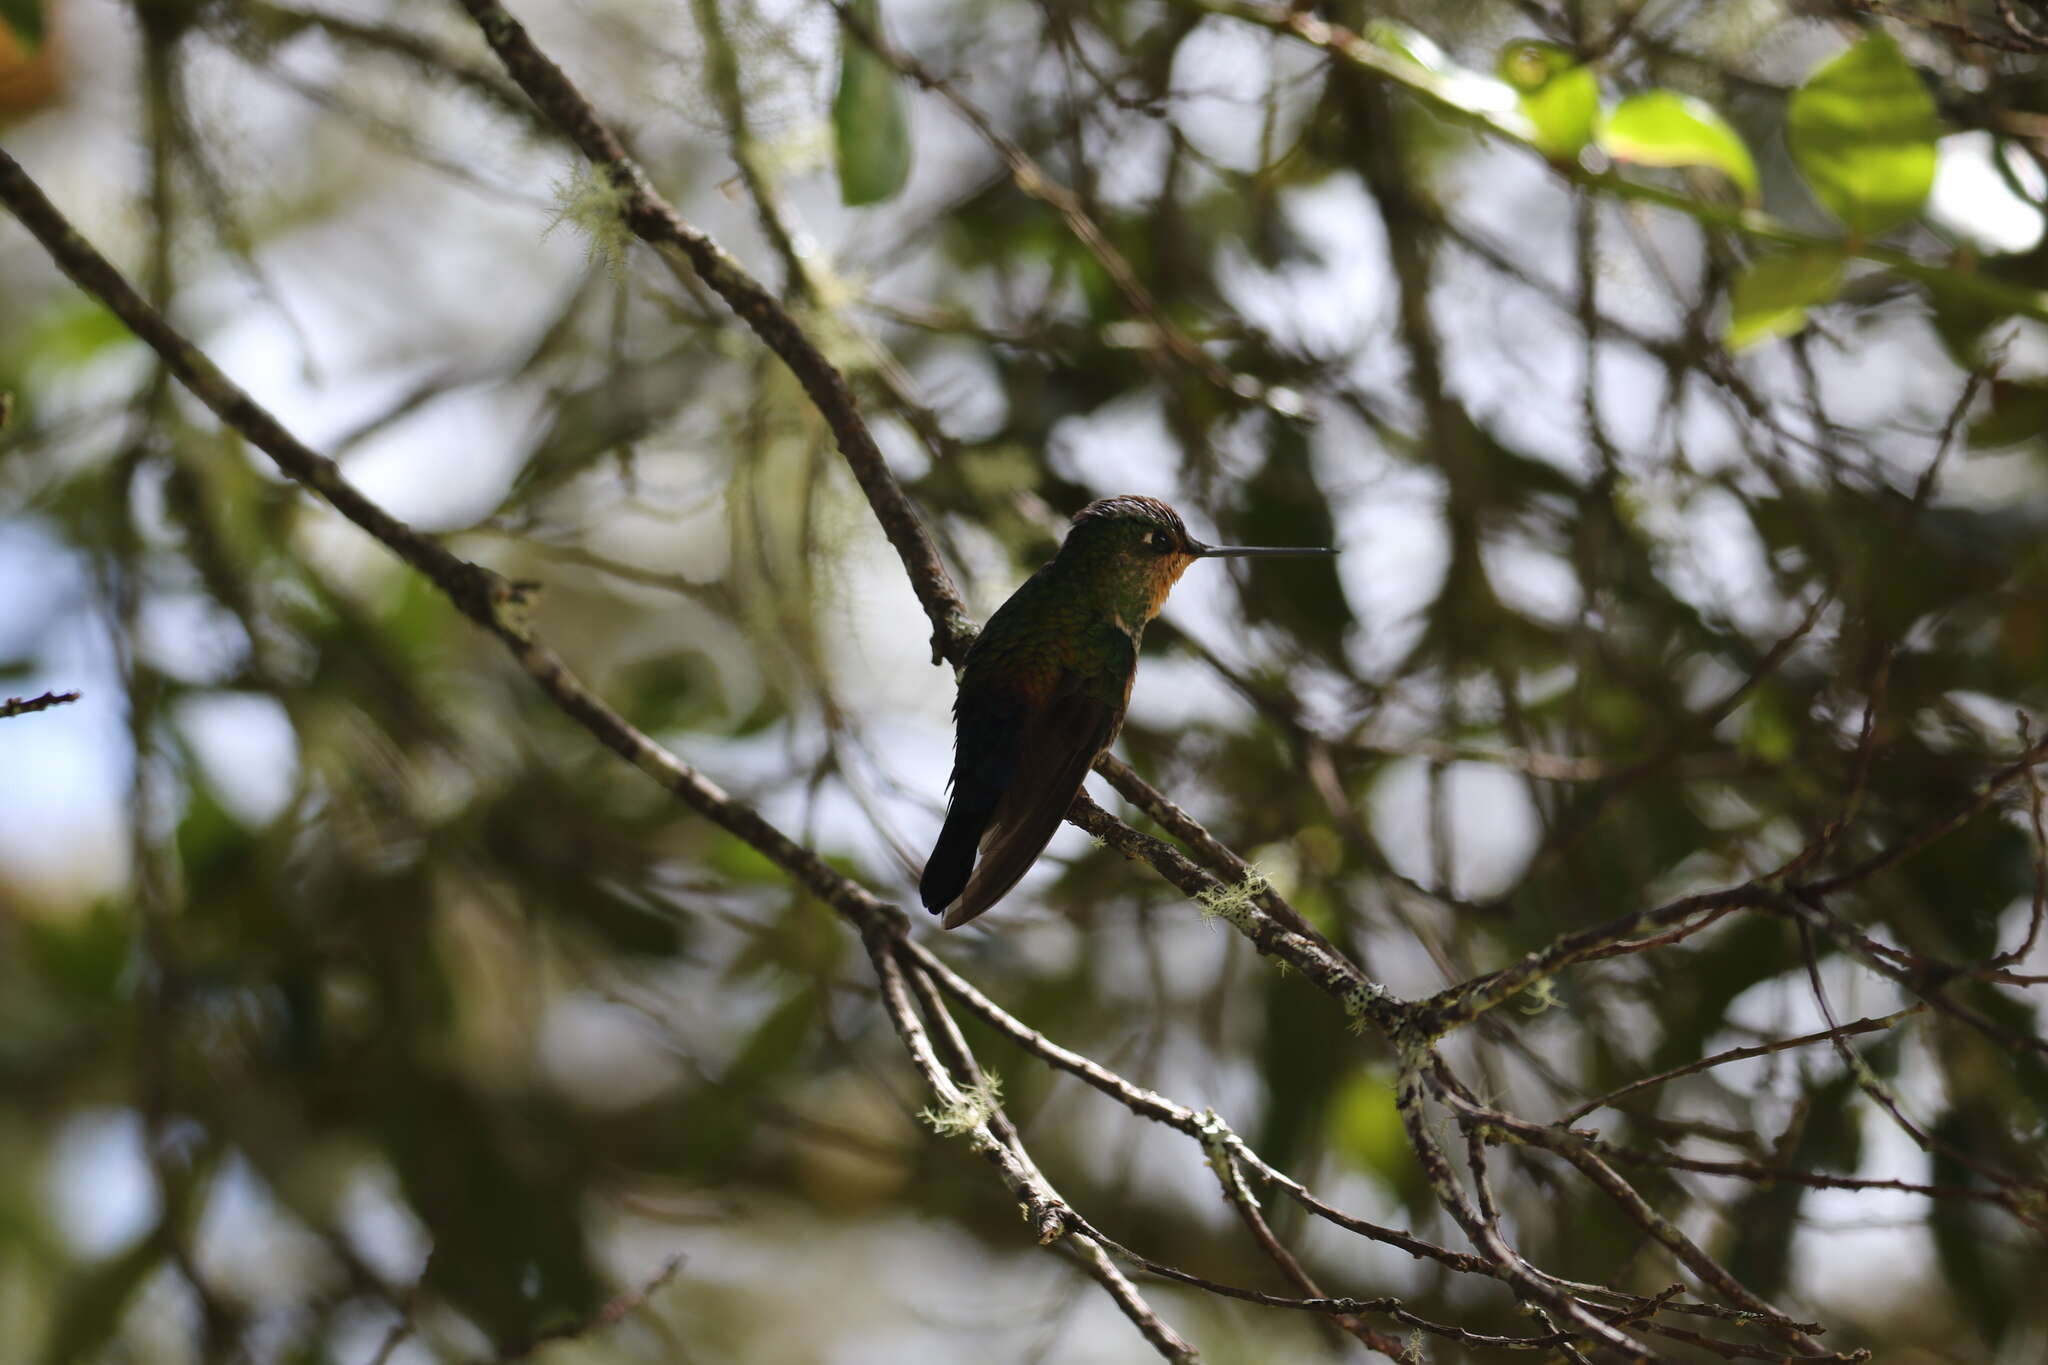 Image of Blue-throated Starfrontlet